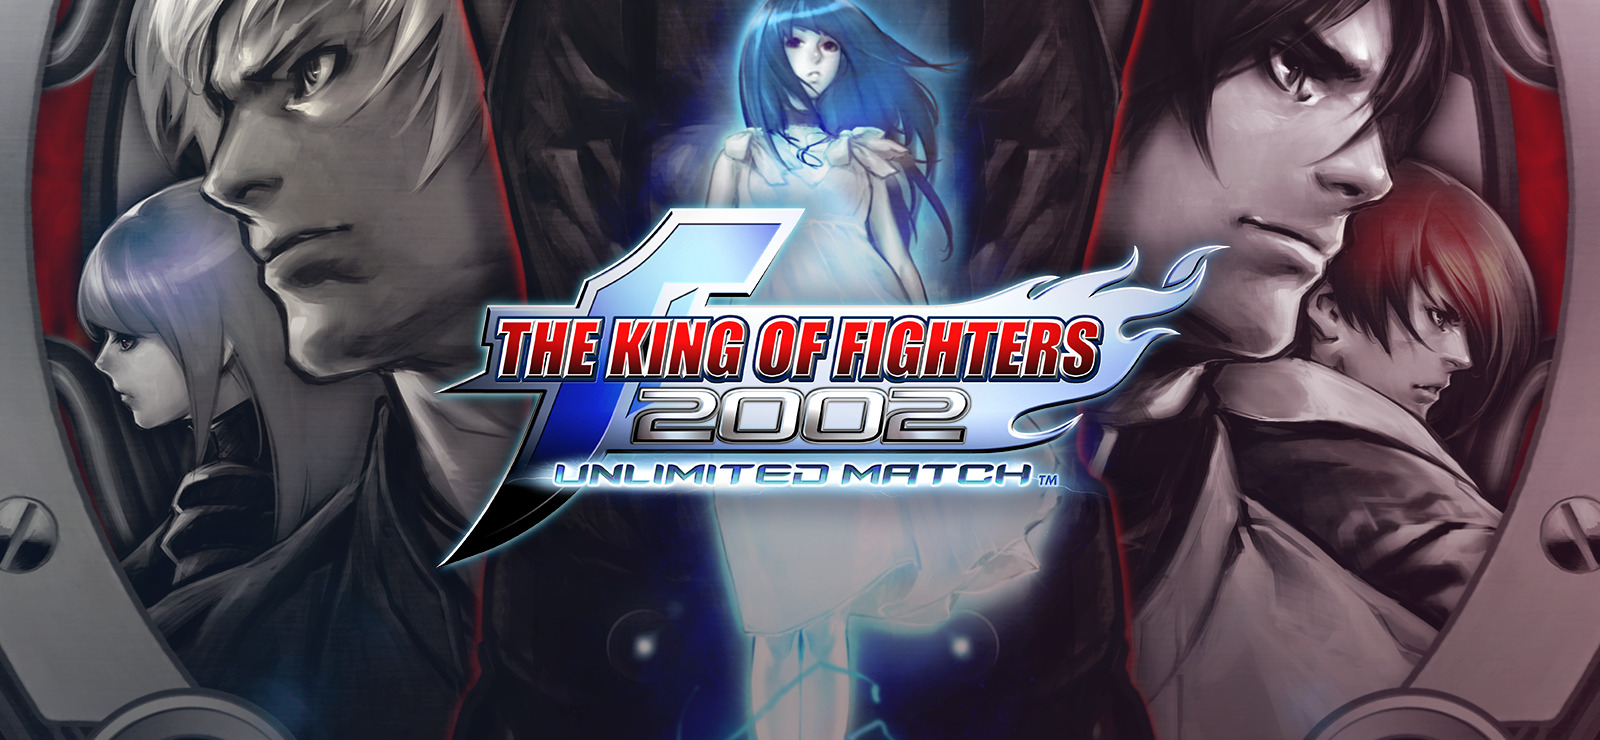 the king of fighters 2002 unlimited match ps2 iso free